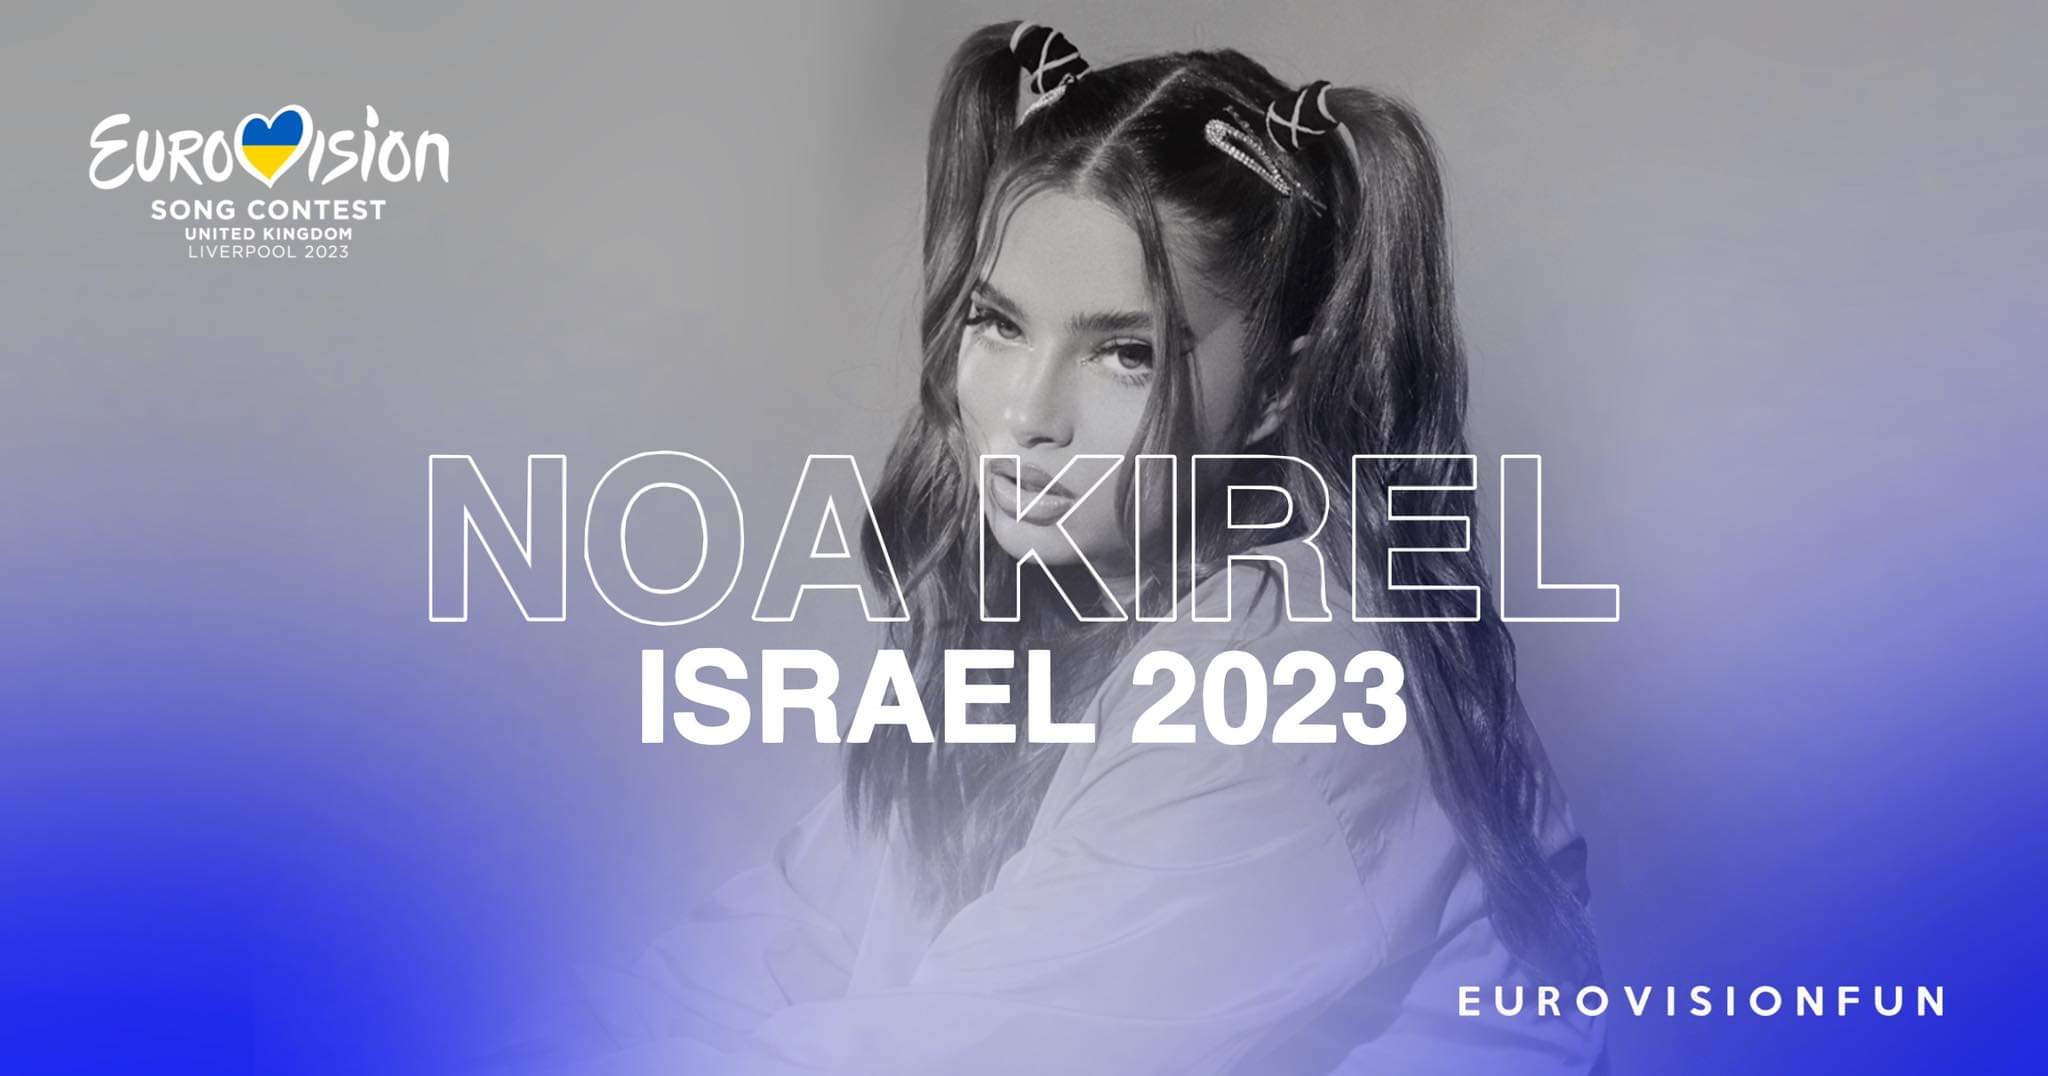 Singer Noa Kirel to represent Israel in 2023 Eurovision Song